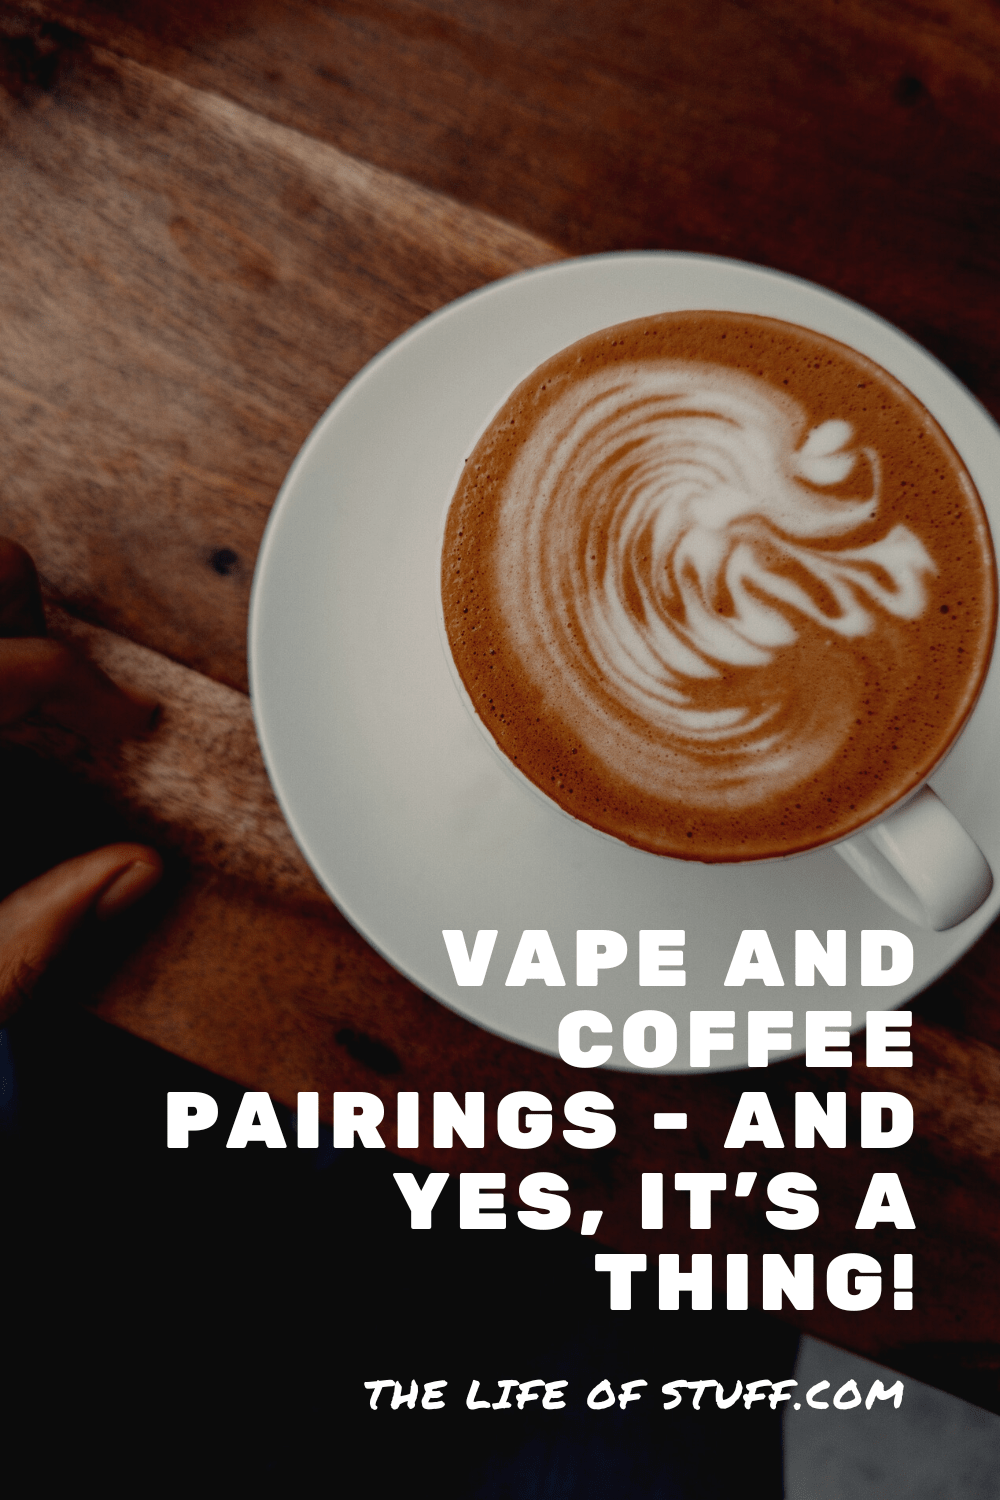 Vape And Coffee Pairings - And Yes, It's A Thing! - The Life of Stuff